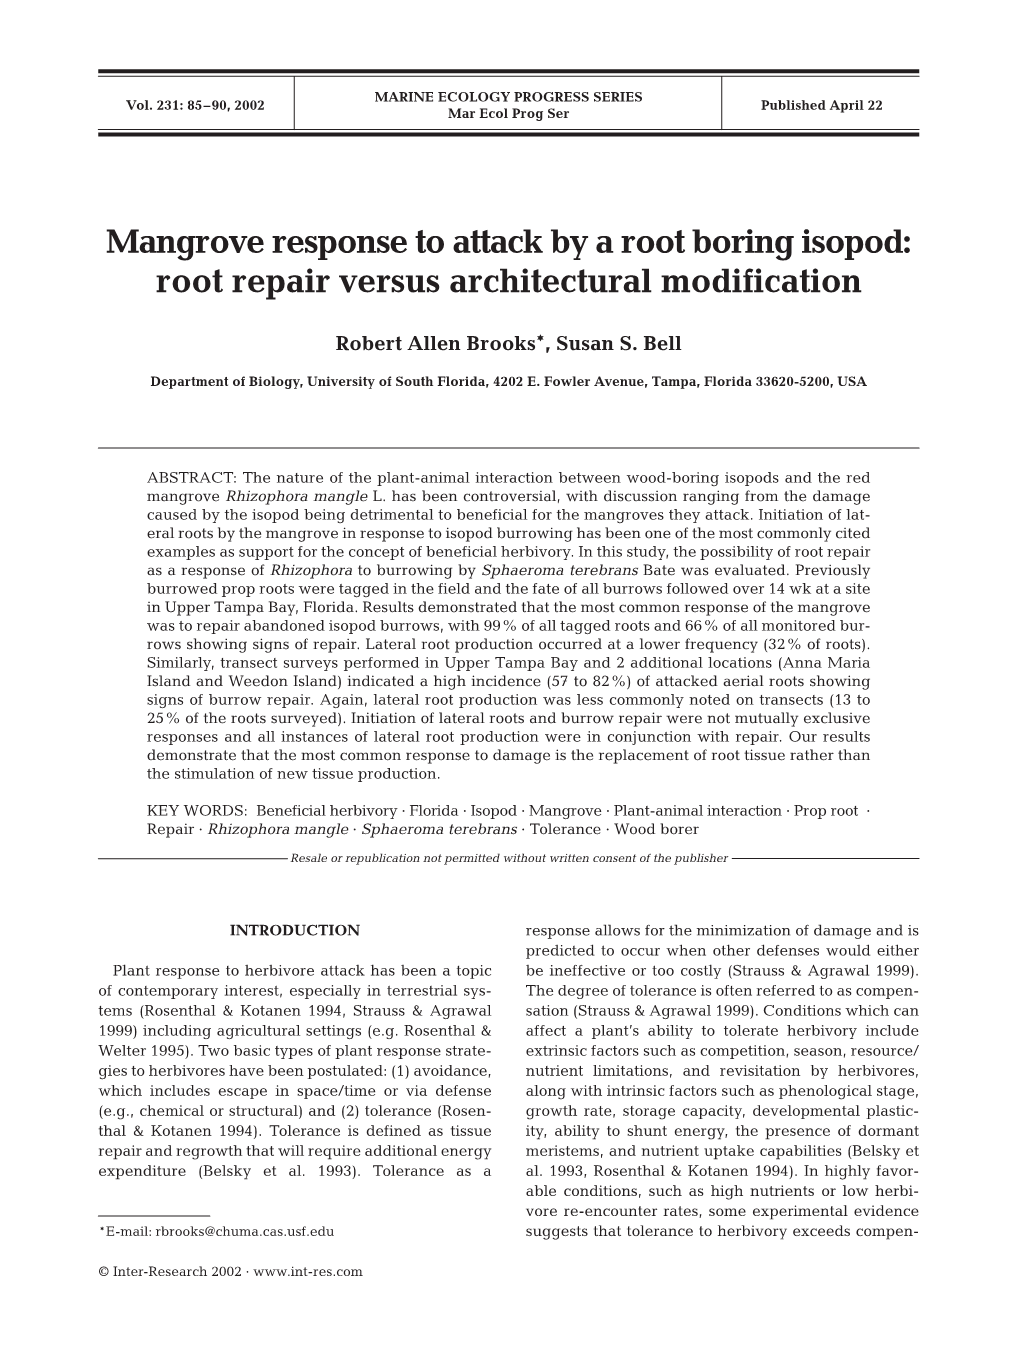 Mangrove Response to Attack by a Root Boring Isopod: Root Repair Versus Architectural Modification